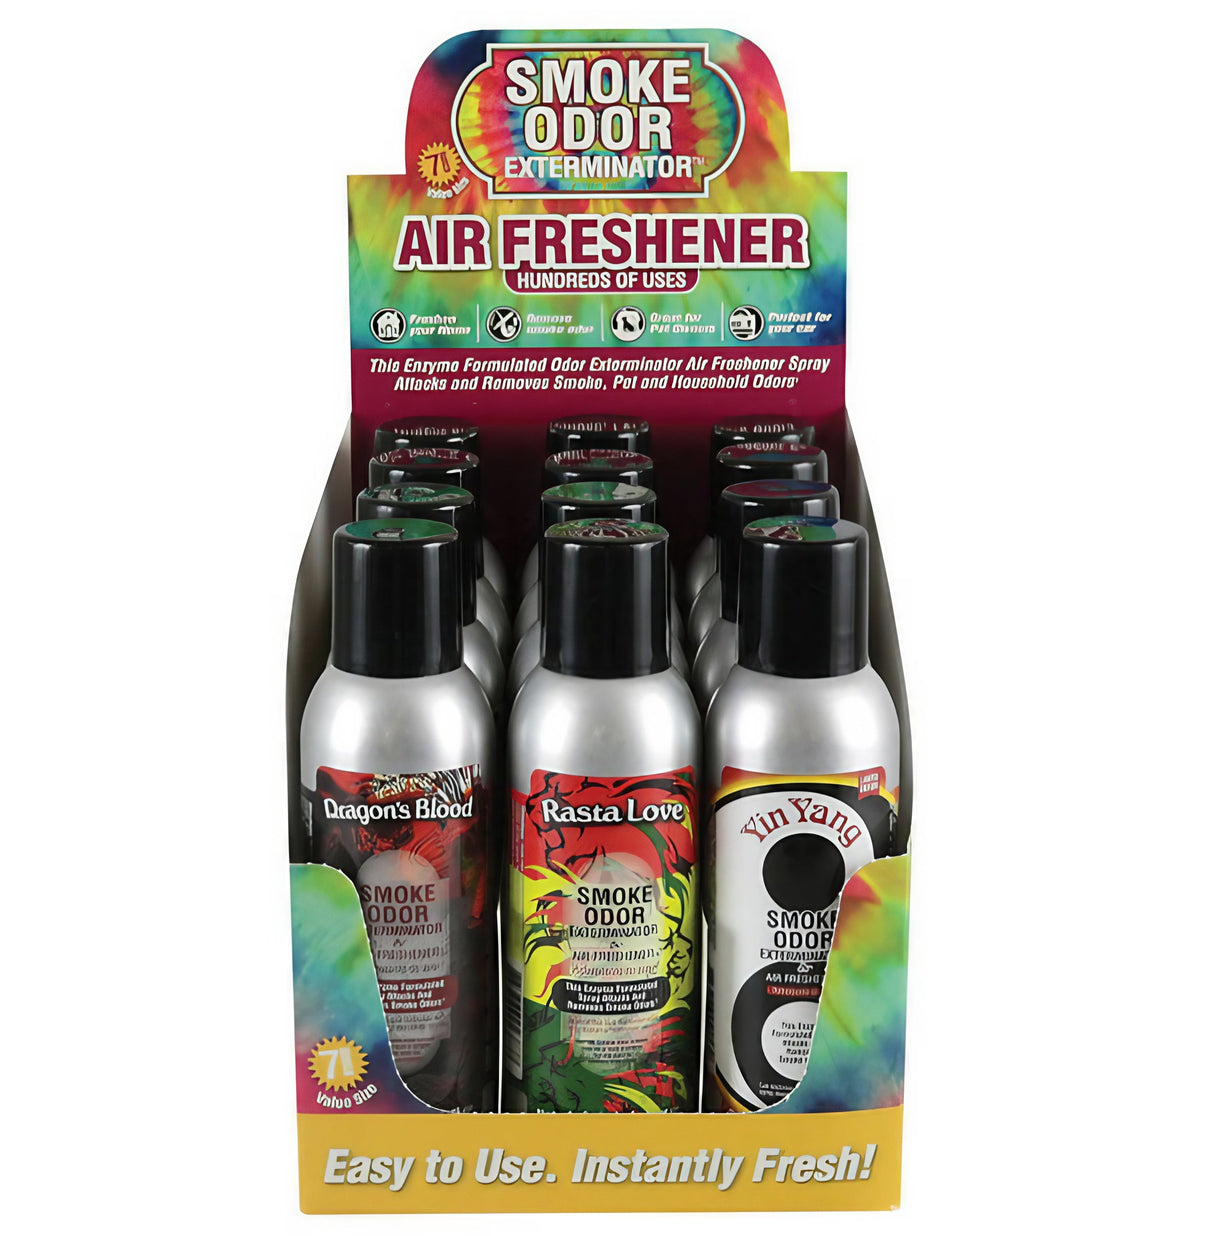 Smoke Odor Exterminator Spray 12 Pack in assorted scents, front view of colorful display box